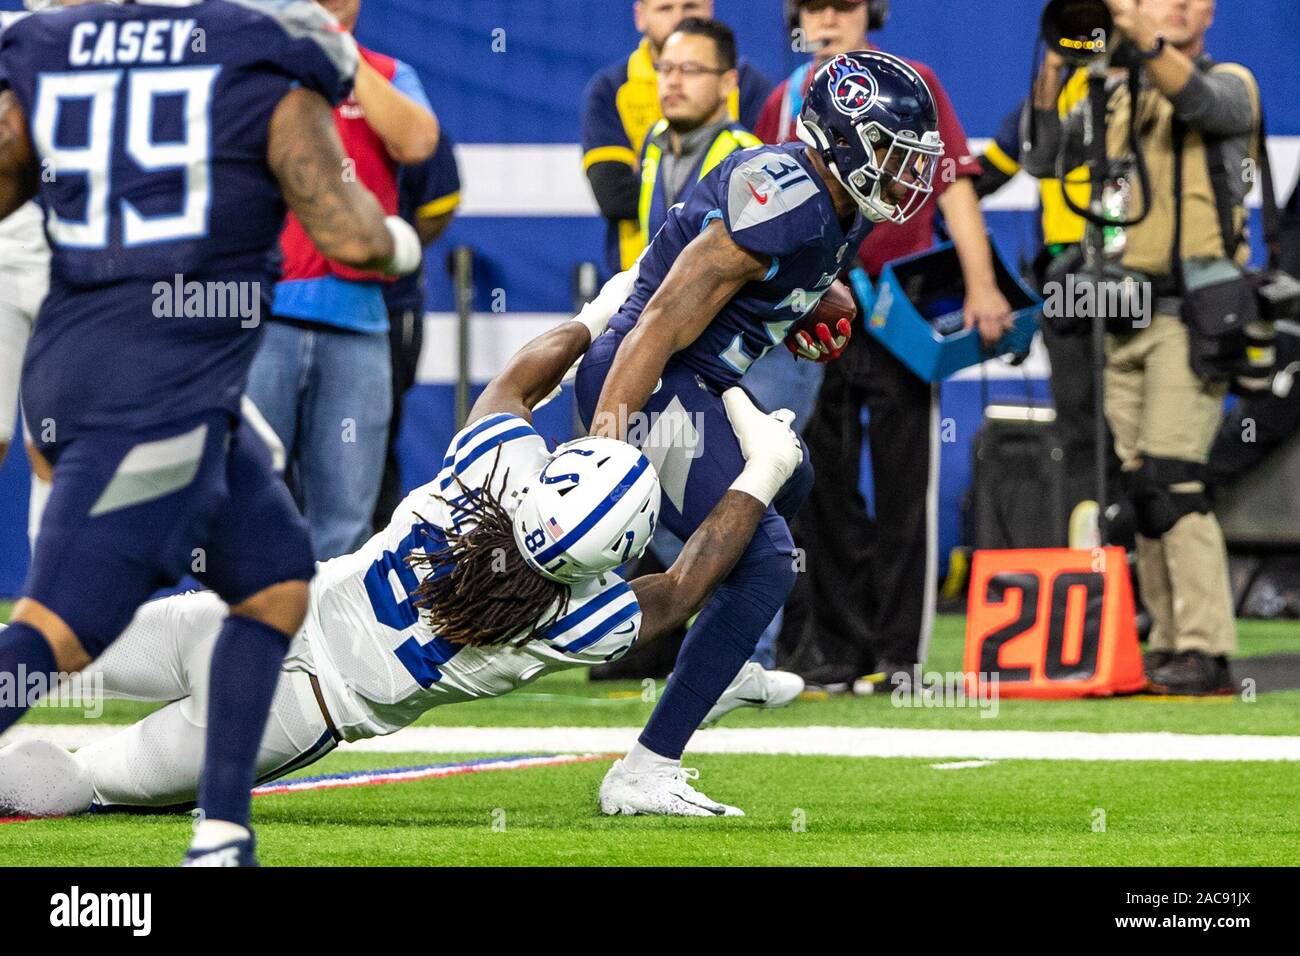 Indianapolis, Indiana, USA. 1st Dec, 2019. Tennessee Titans free safety Kevin Byard (31) is tackled by Indianapolis Colts tight end Mo Alie-Cox (81) after an interception in the second half of the game between the Tennessee Titans and the Indianapolis Colts at Lucas Oil Stadium, Indianapolis, Indiana. Credit: Scott Stuart/ZUMA Wire/Alamy Live News Stock Photo